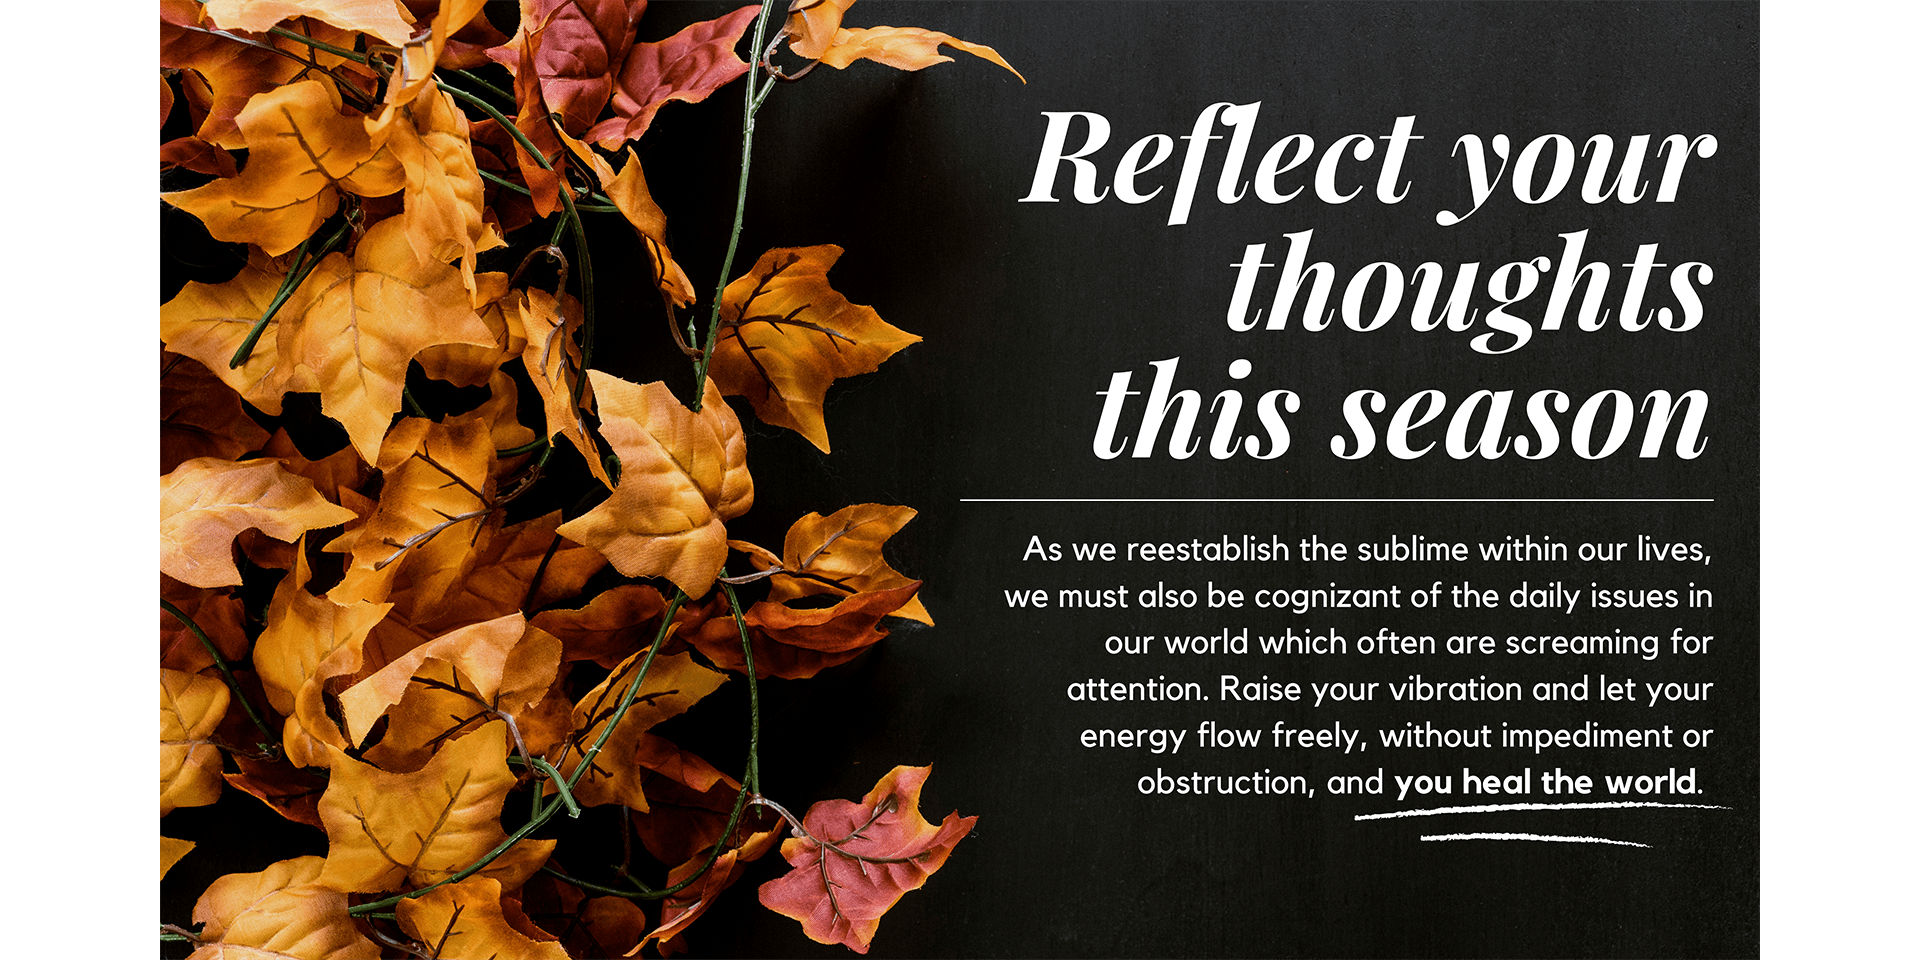 Reflects your thoughts this season